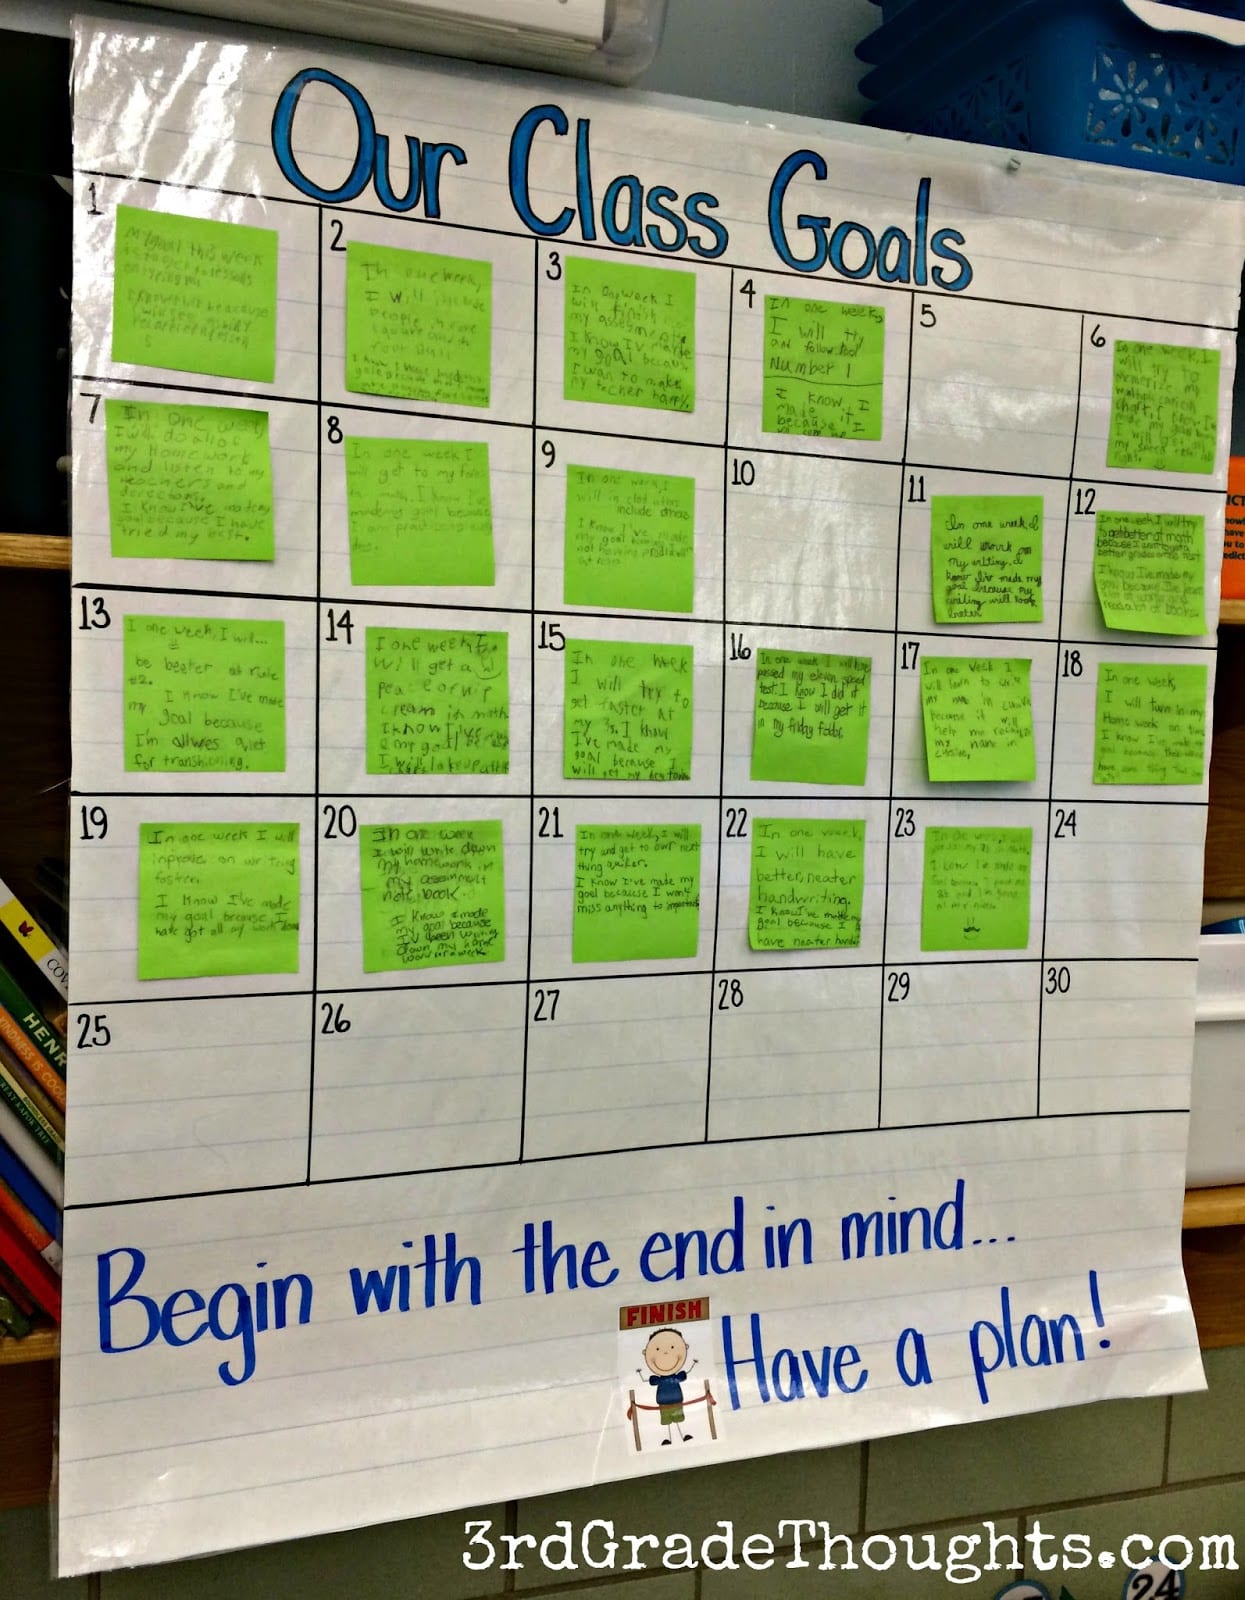 research on goal setting for students